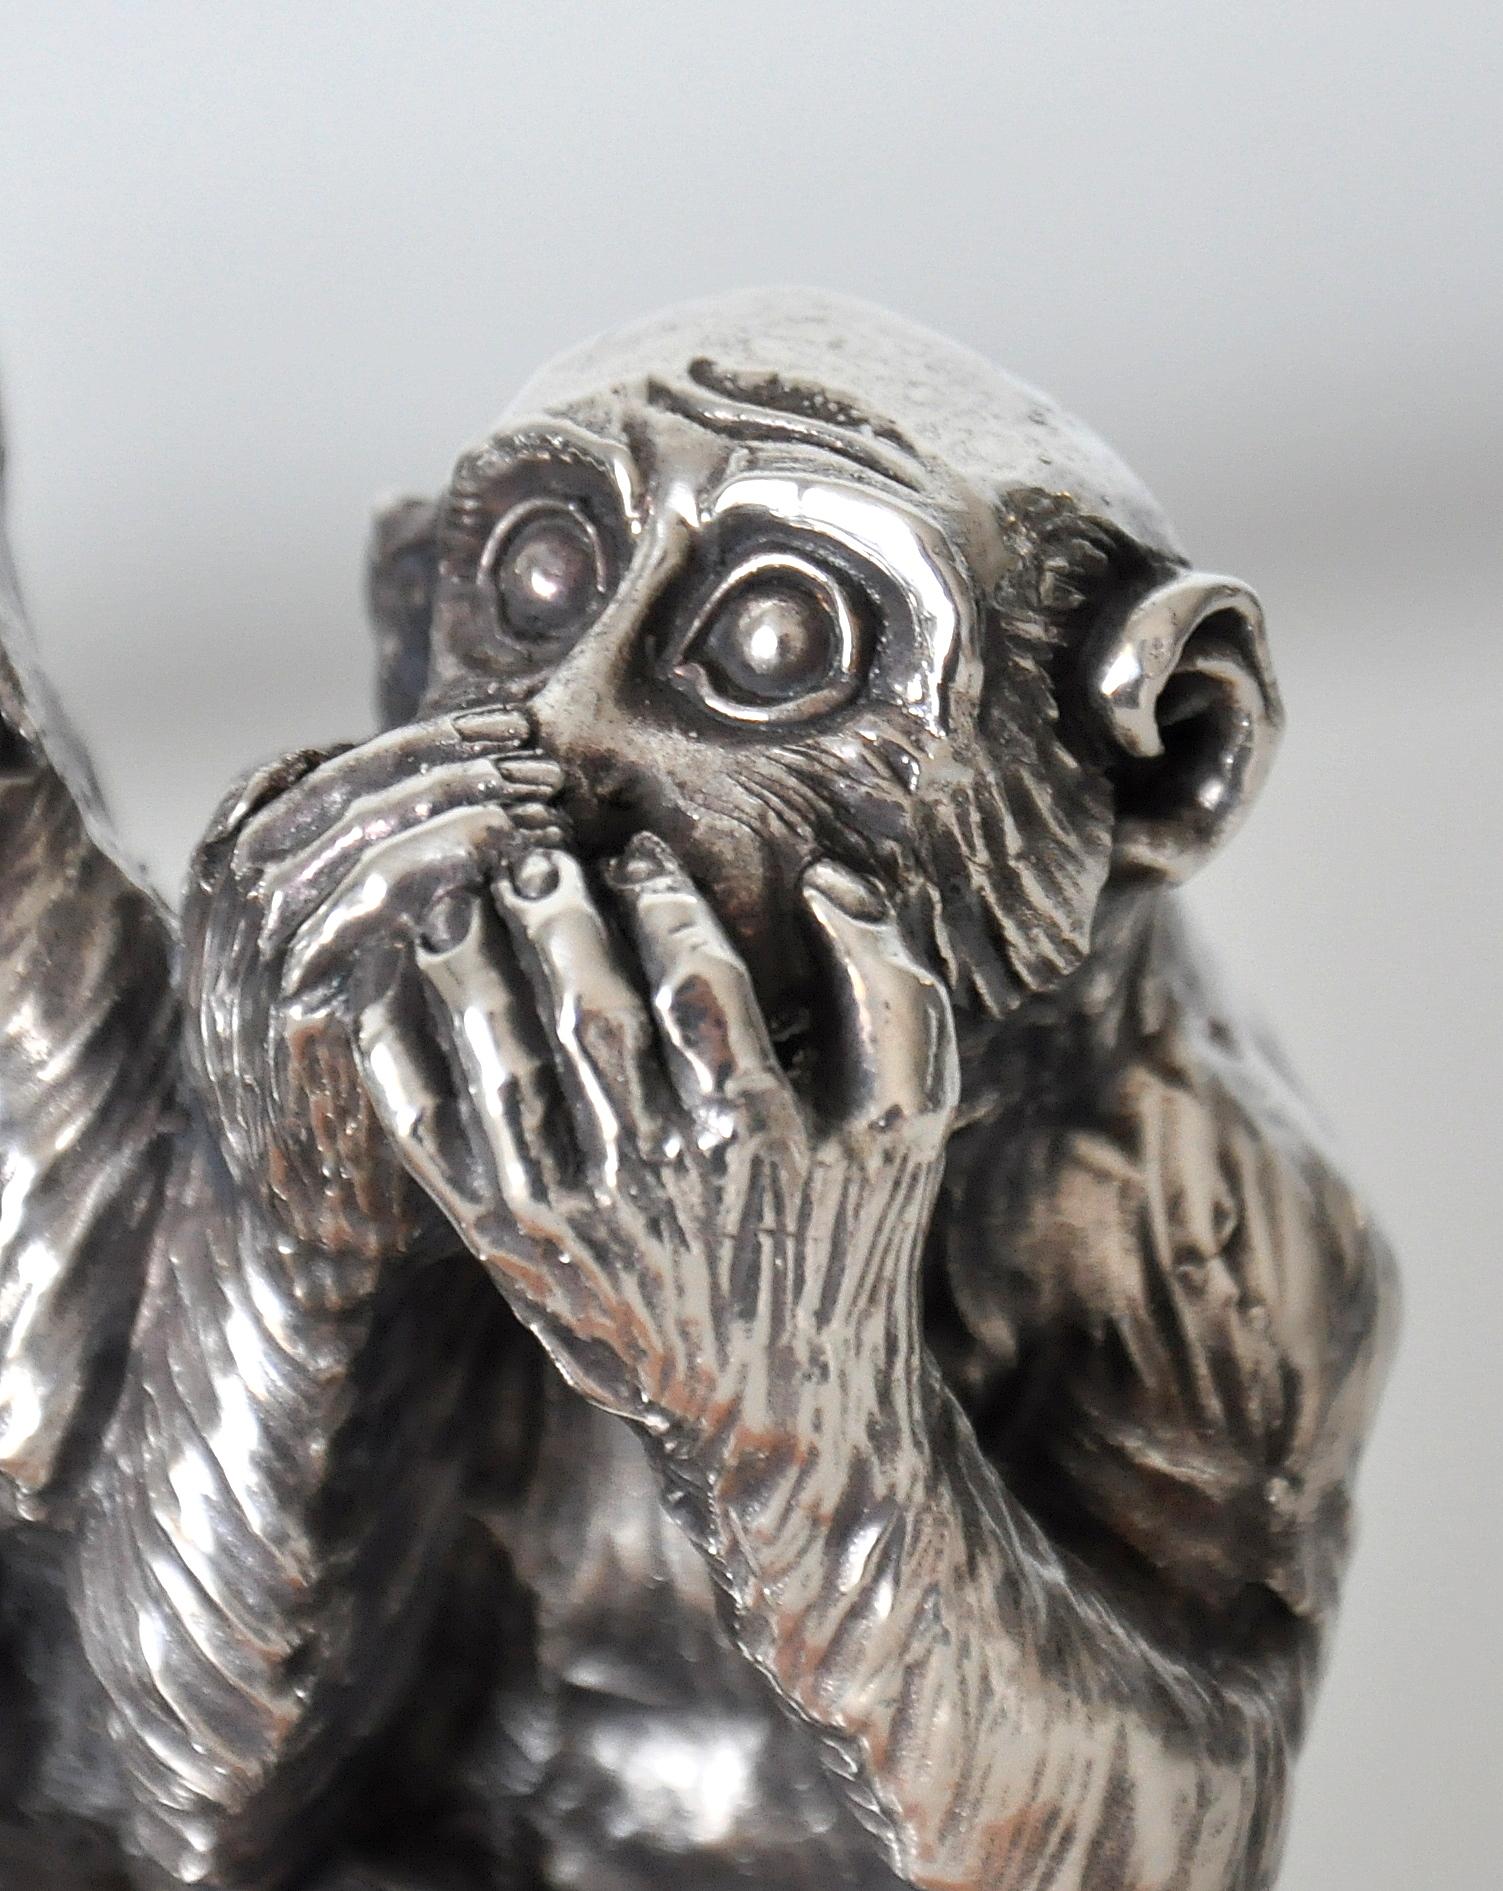 A vintage sterling silver clad statue depicting the three mystic apes Mizaru who sees no evil, Kikazaru who hears no evil, and Iwazaru who speaks no evil. The finely detailed See no evil, Hear no evil, Speak no evil sculpture sits atop a rectangular